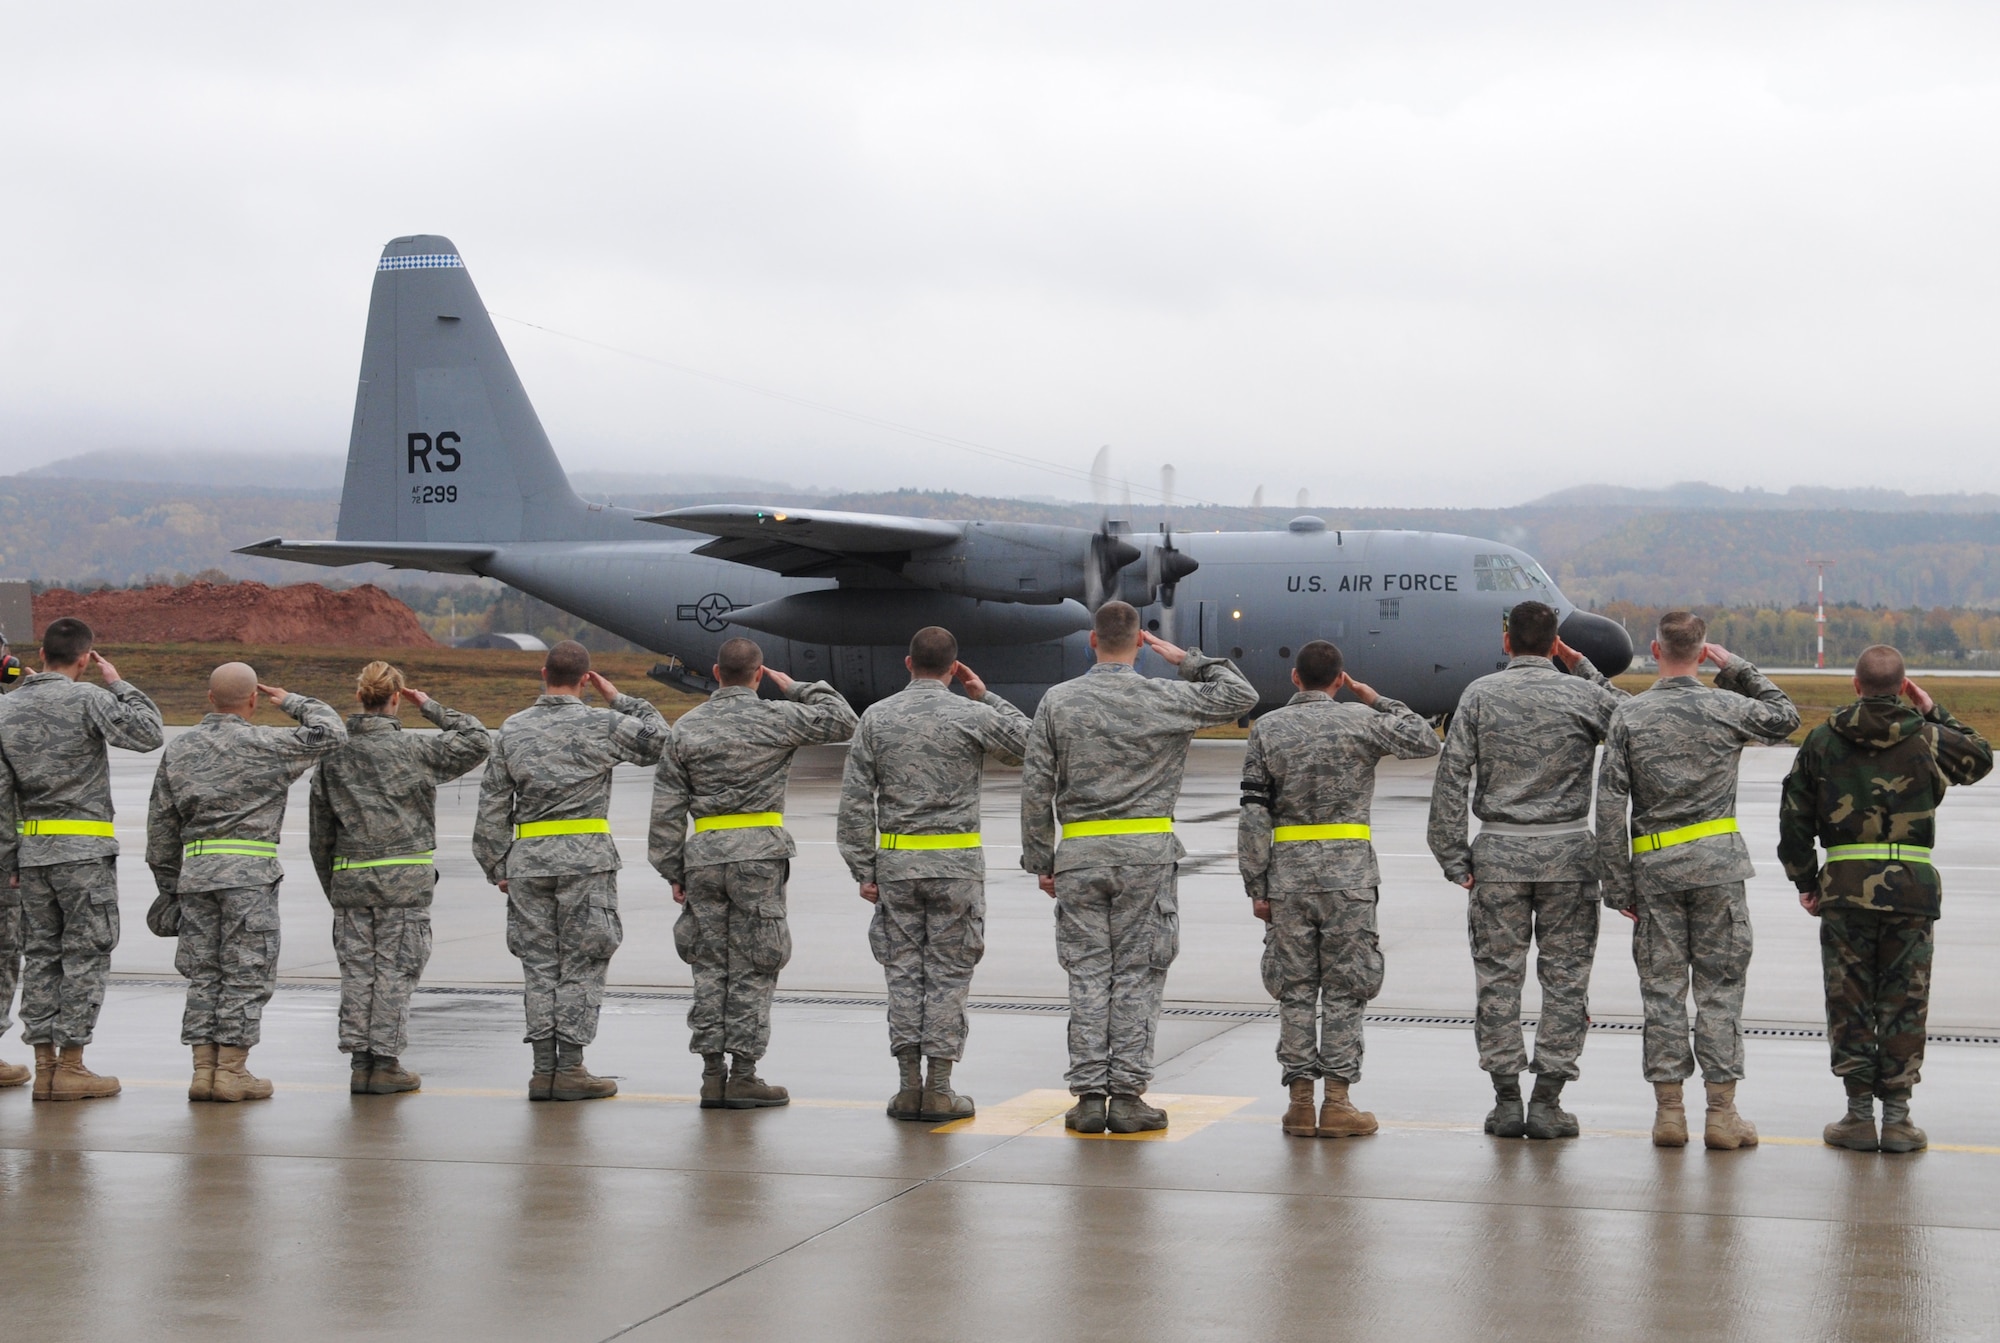 U.S. Air Force Airmen from the 86th Aircraft Maintenance Squadron render salutes to Ramstein's last C-130E Hercules while it taxies down the flight line for departure, Ramstein Air Base, Germany, Nov. 2, 2009.  The C-130E Hercules has provided more than 40 years of airpower to U.S. Air Forces in Europe, and is being replaced with the new C-130J Super Hercules as part of the revitalization of the Air Force fleet. (U.S. Air Force photo by Airman 1st Class Caleb Pierce)